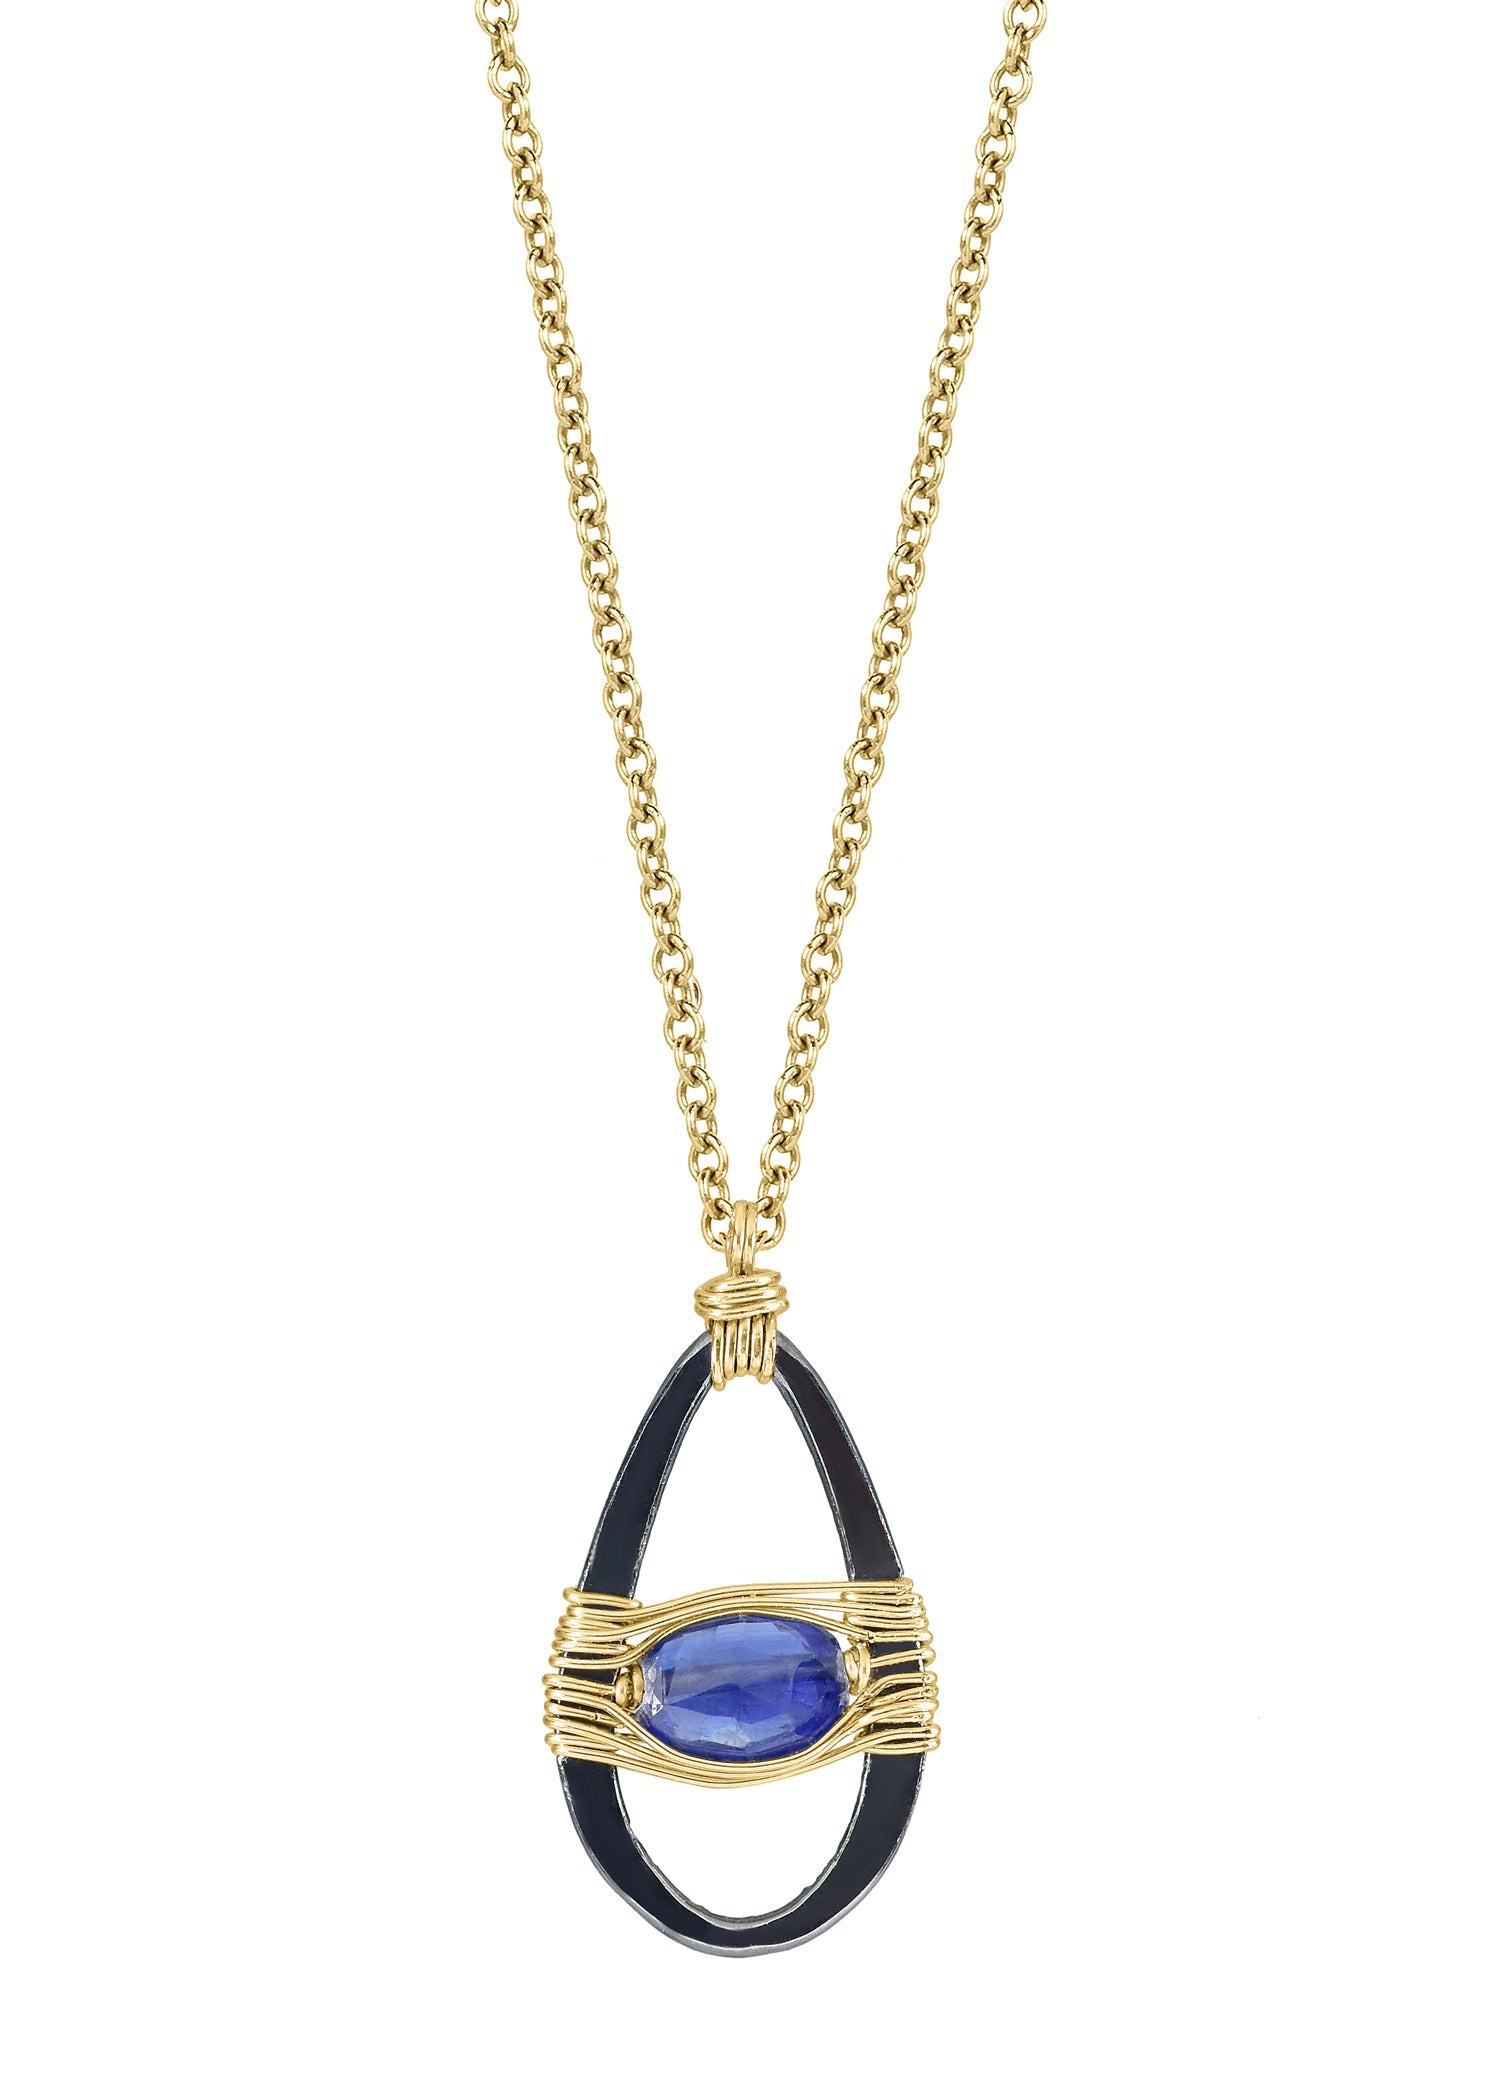 Kyanite Blackened sterling silver 14k gold fill Mixed metal Necklace measures 16" in length Pendant measures 5/8" in length and 3/8" in width at the widest point Handmade in our Los Angeles studio